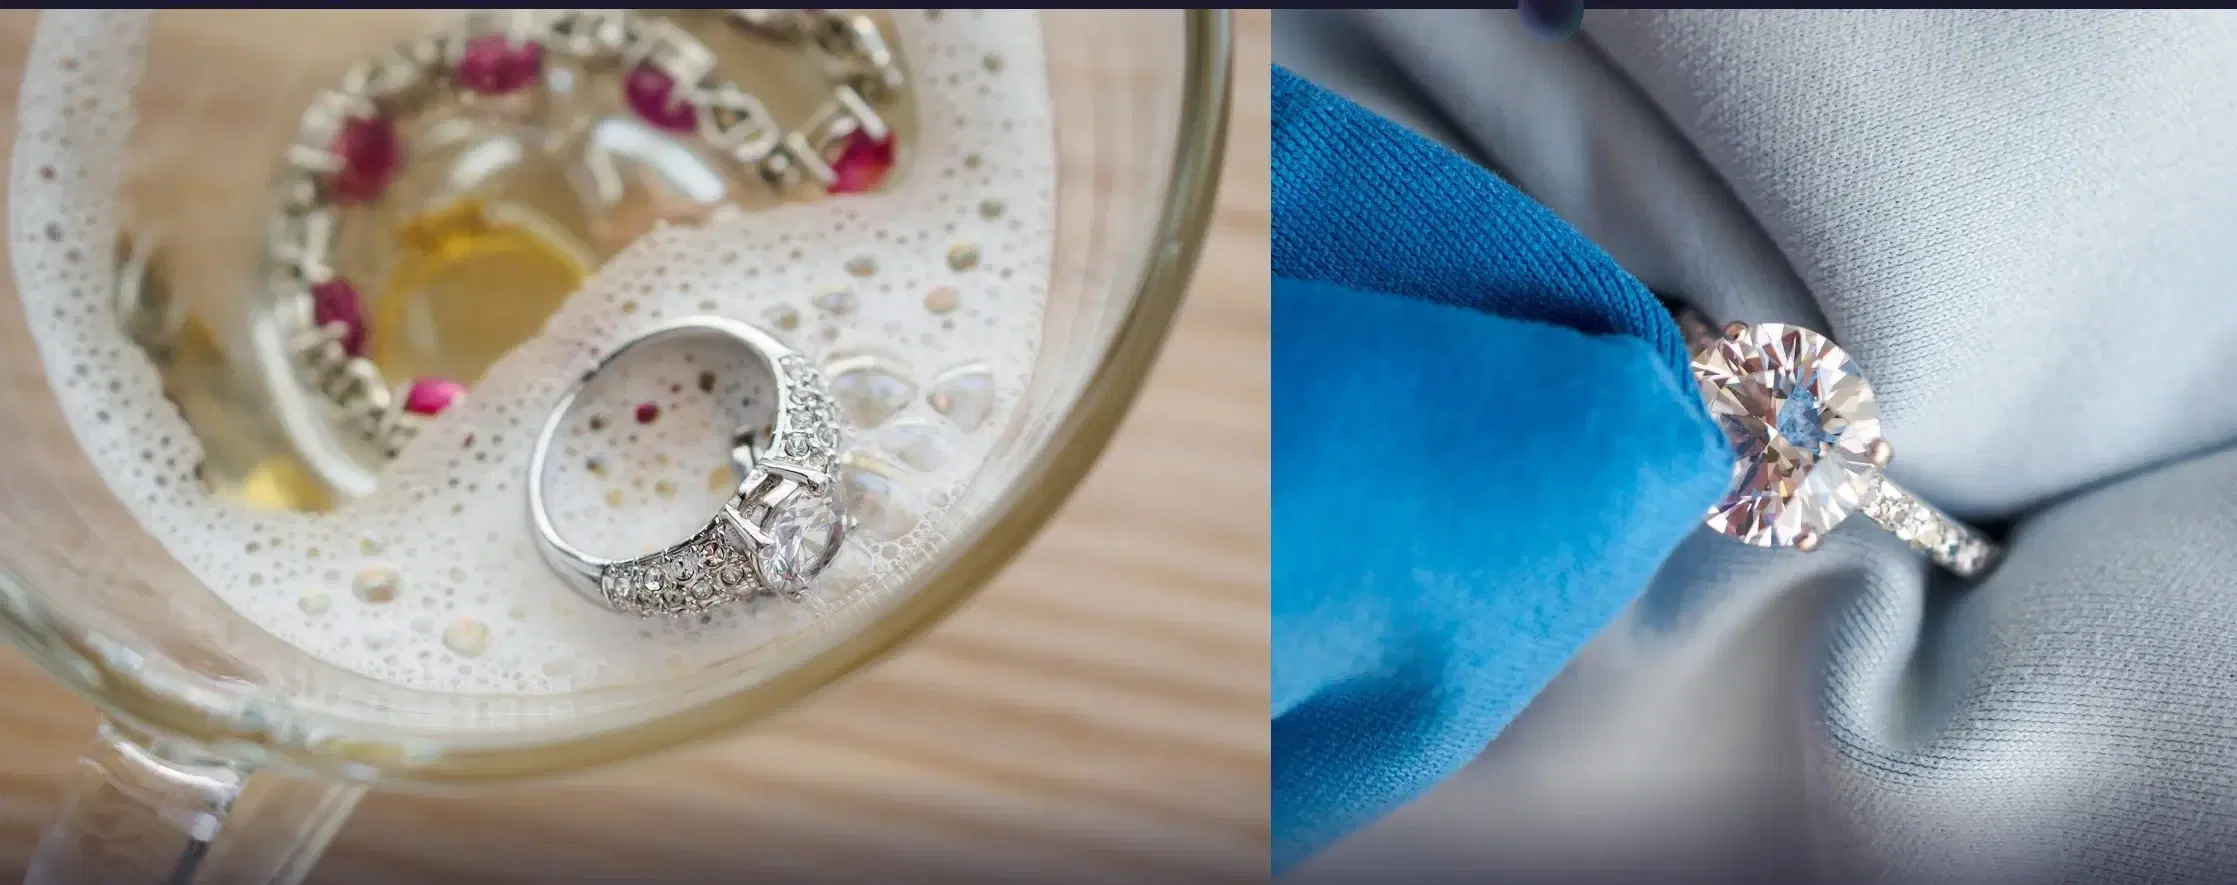 Diamond Jewelry Care: How to Clean & Keep Them in Pristine Condition